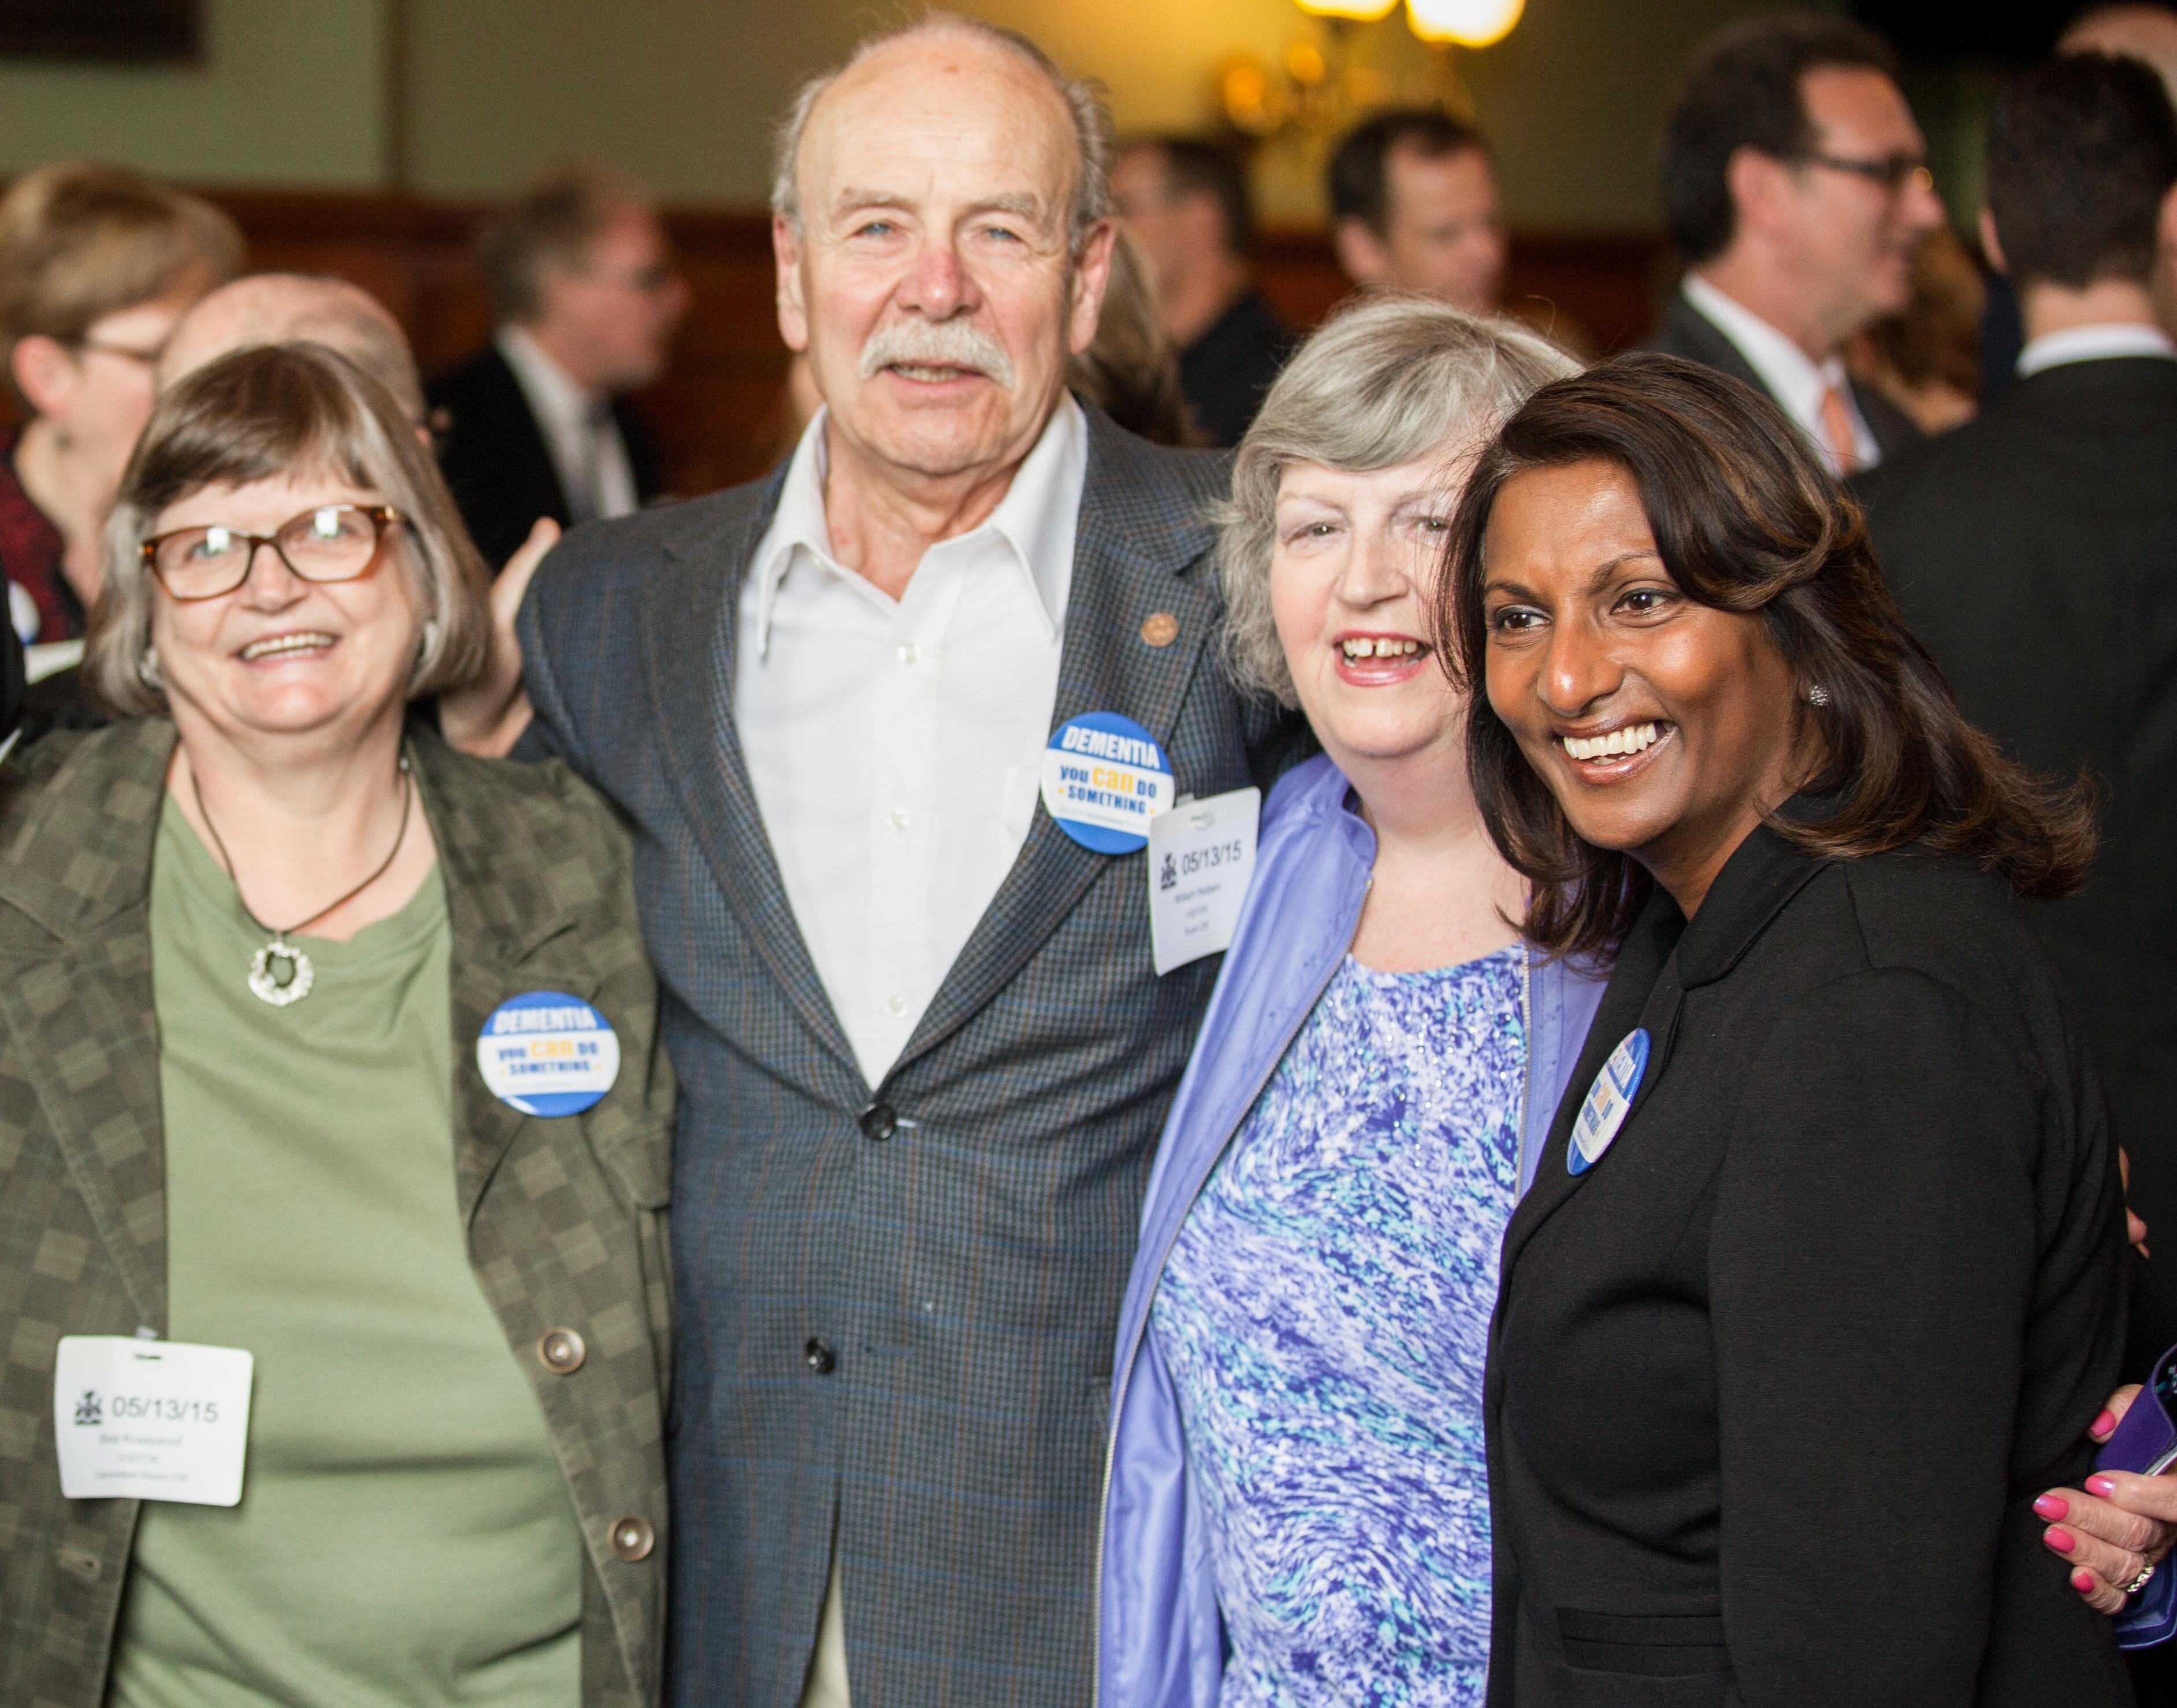 From left to right, three members of the Dementia Advisory Group. Bea Kraayenhof, Bill Heibein and Maisie Jackson alongside MPP Indira Naidoo-Harris. The other two members are Mary Beth Wighton and Phyllis Fehr 